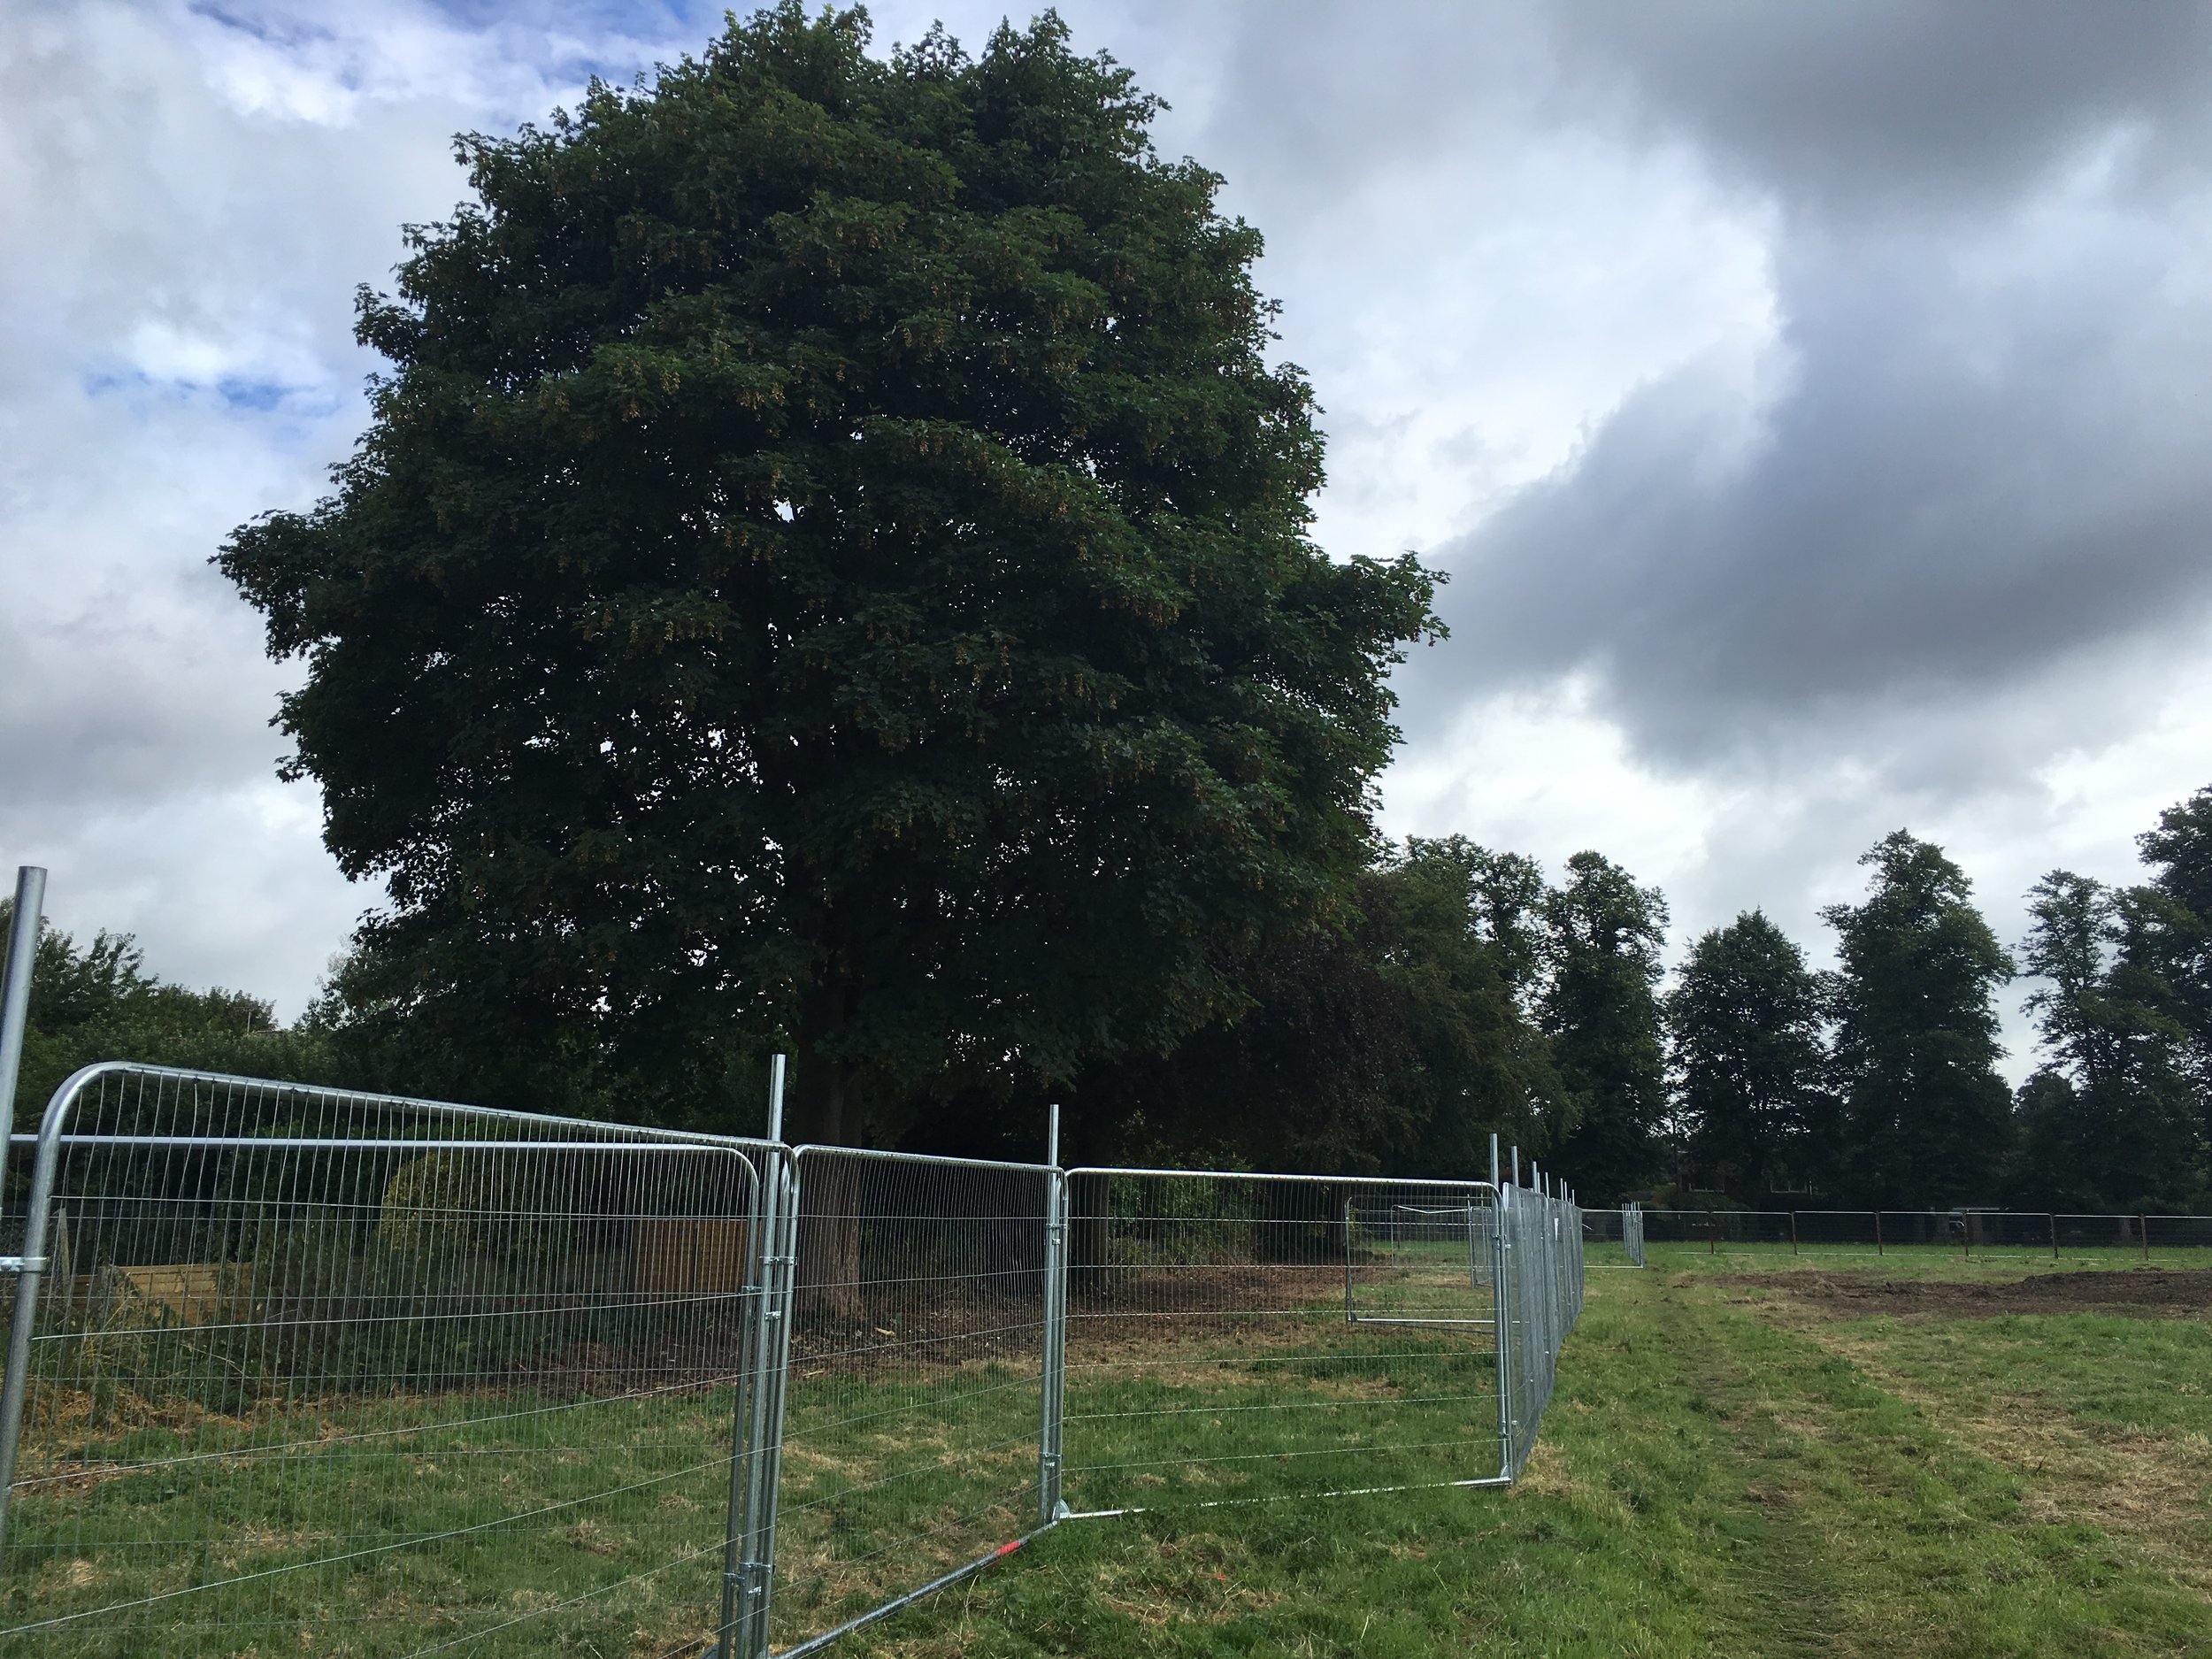  Textbook tree protection fencing on a project in Midlands undertaken with Barnes Walker landscape architects for Morris Homes. 